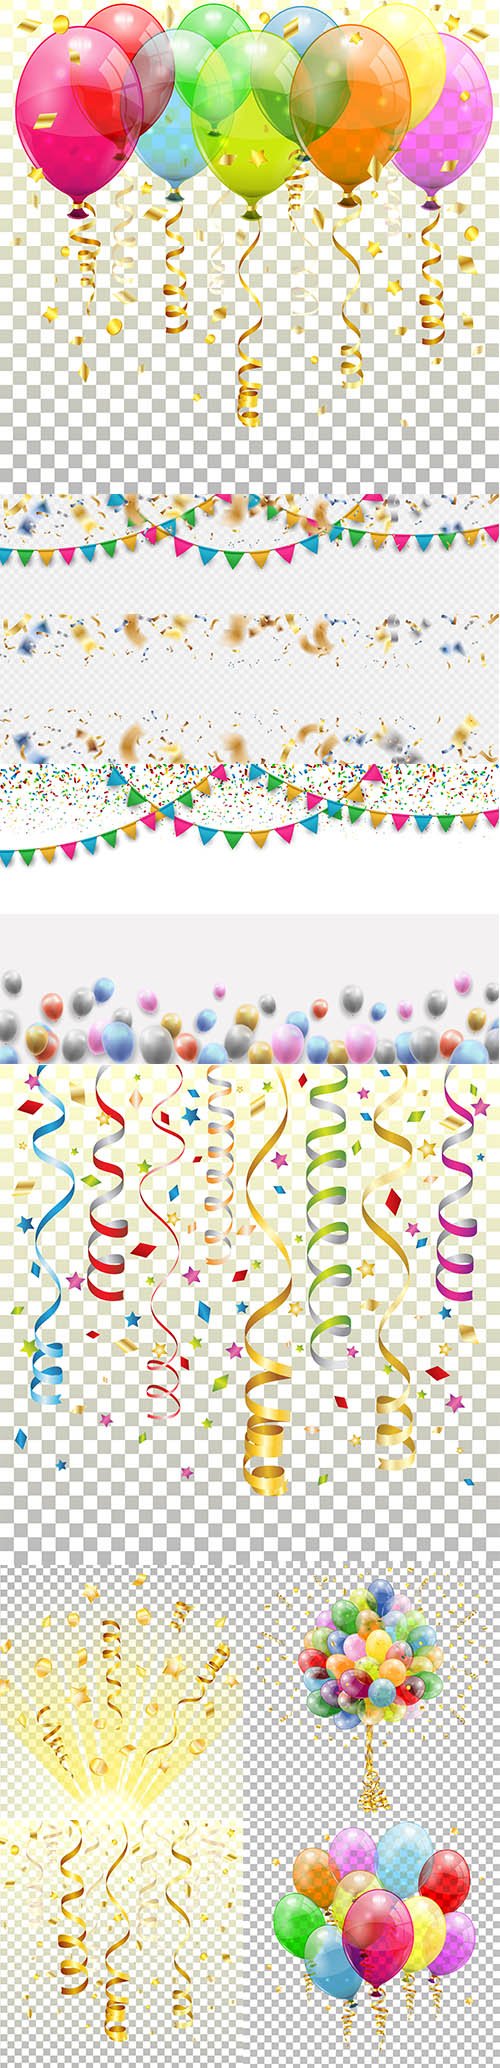 Birthday Background with Colorful Flags, Confetti and Balloons